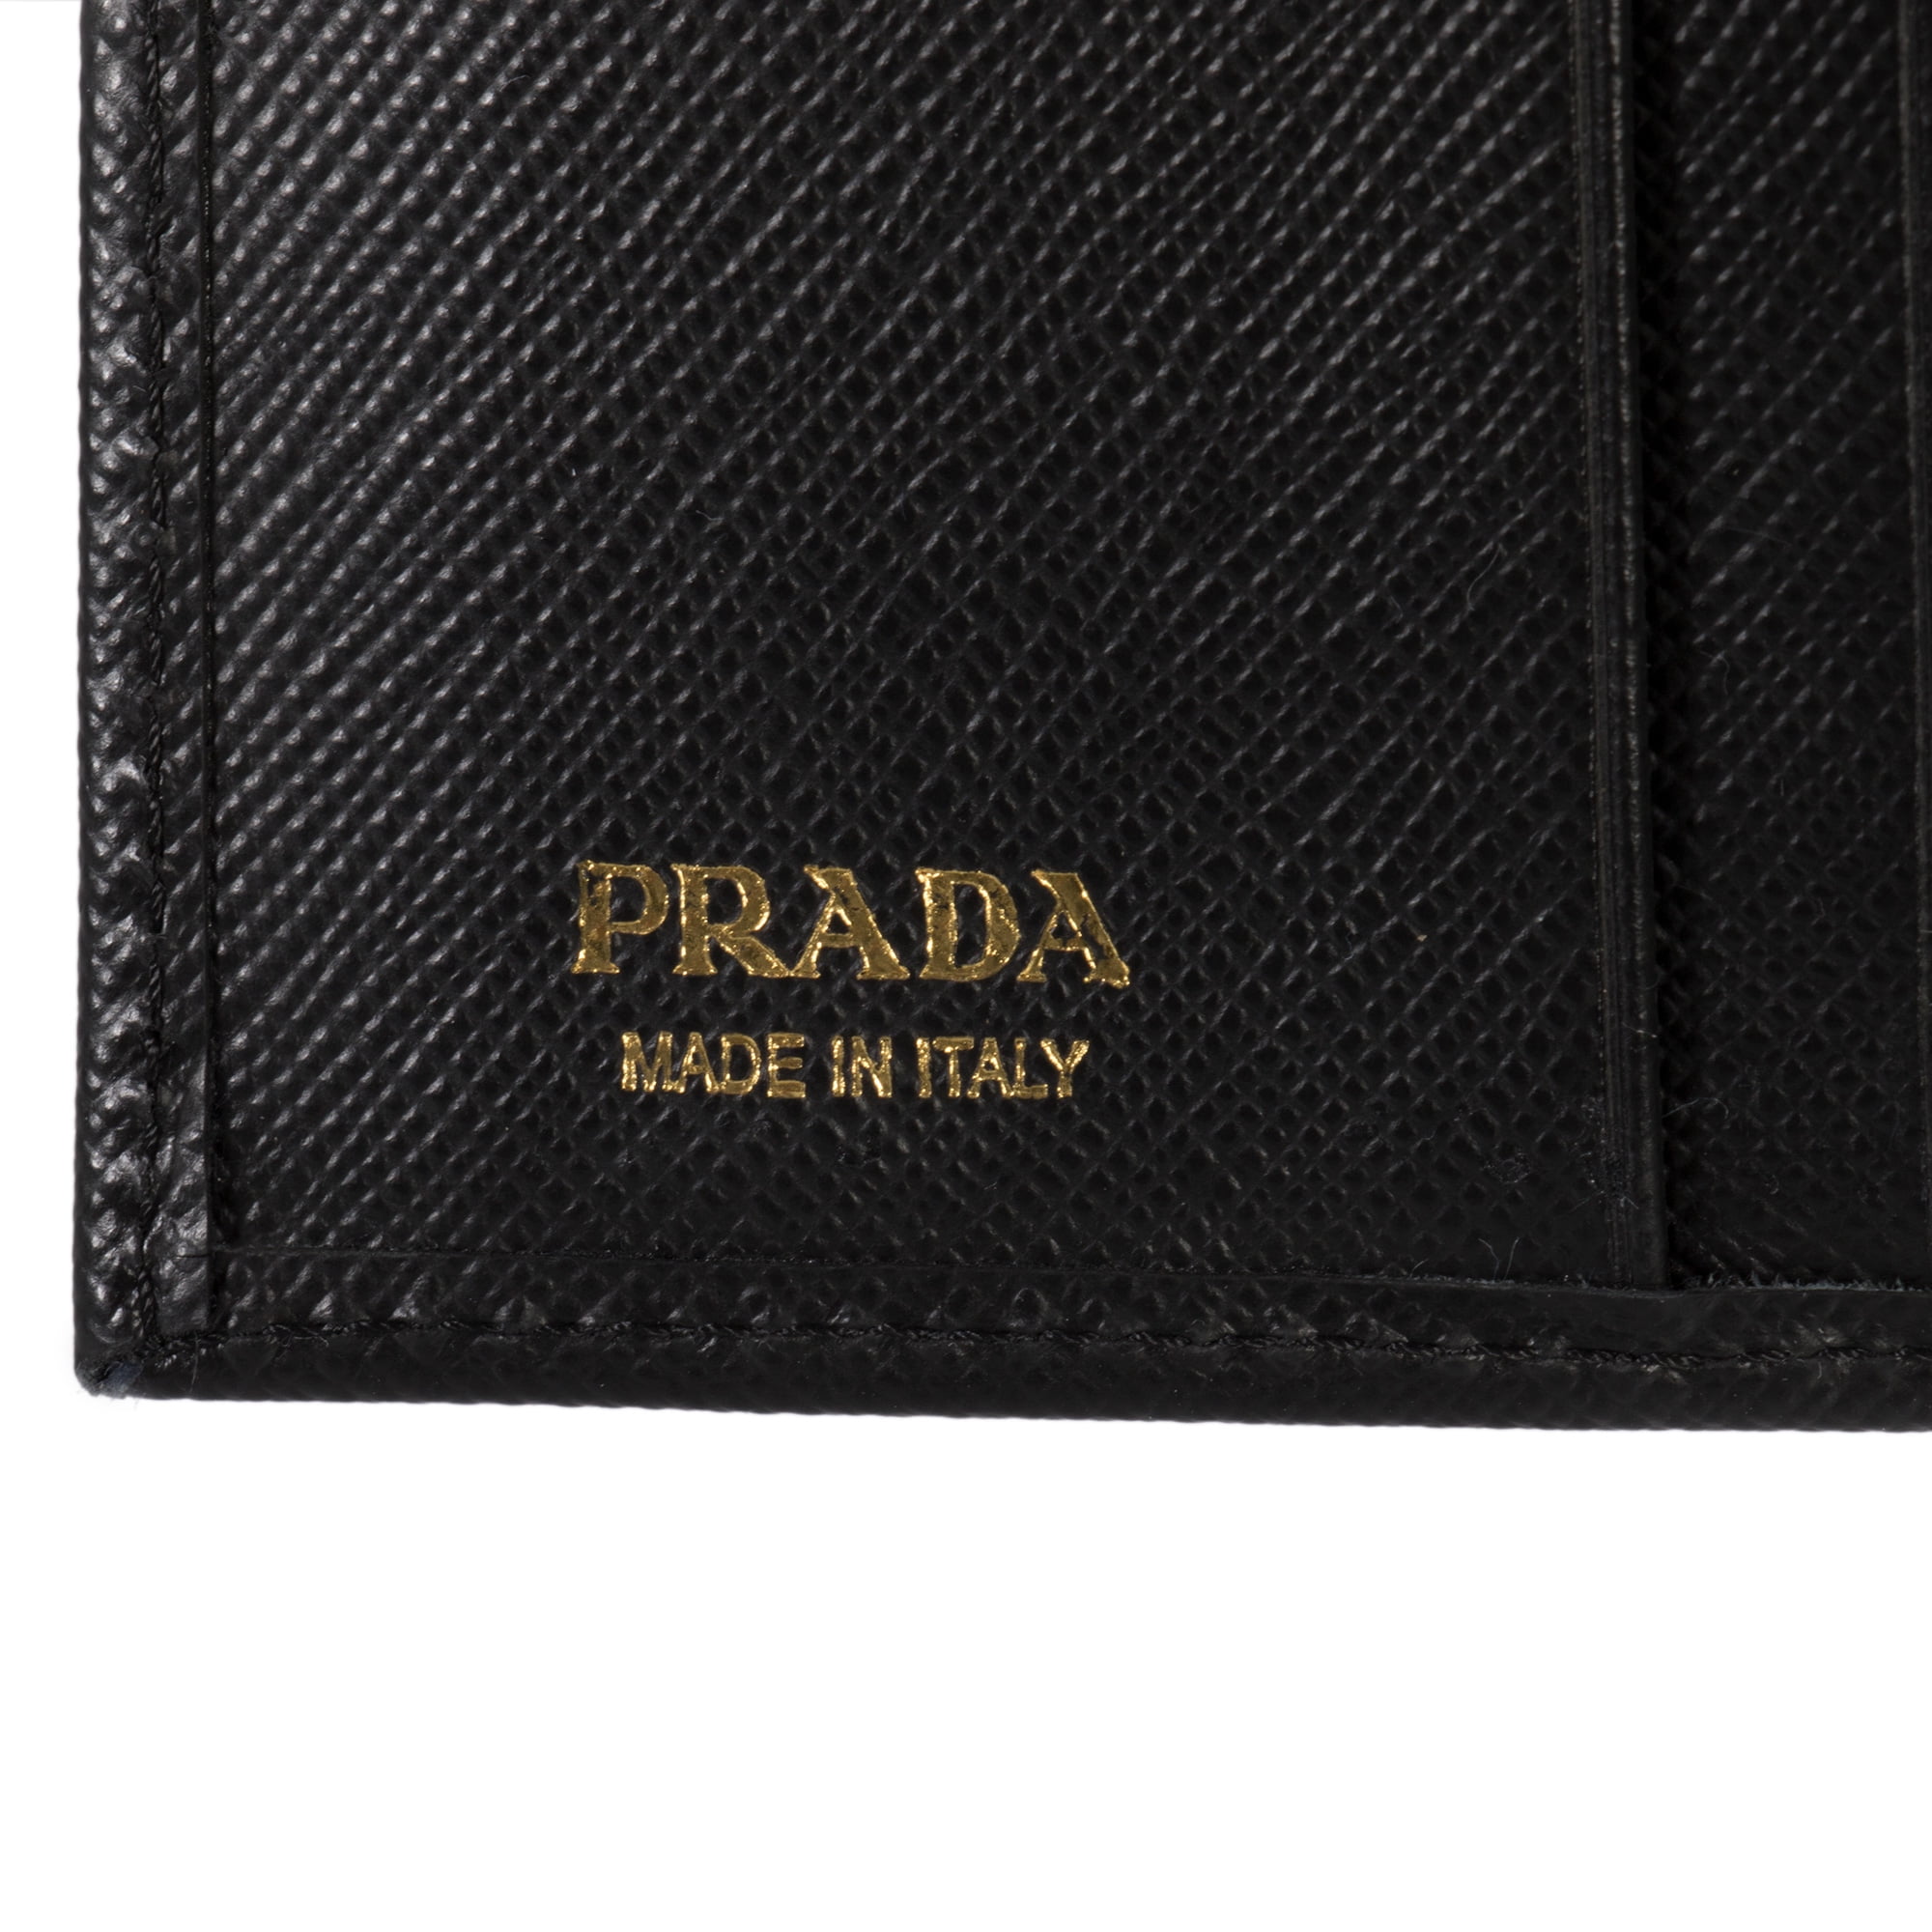 Prada PRD-WALL-1MH132-QME-F0236 Saffiano Leather Flap Wallet with